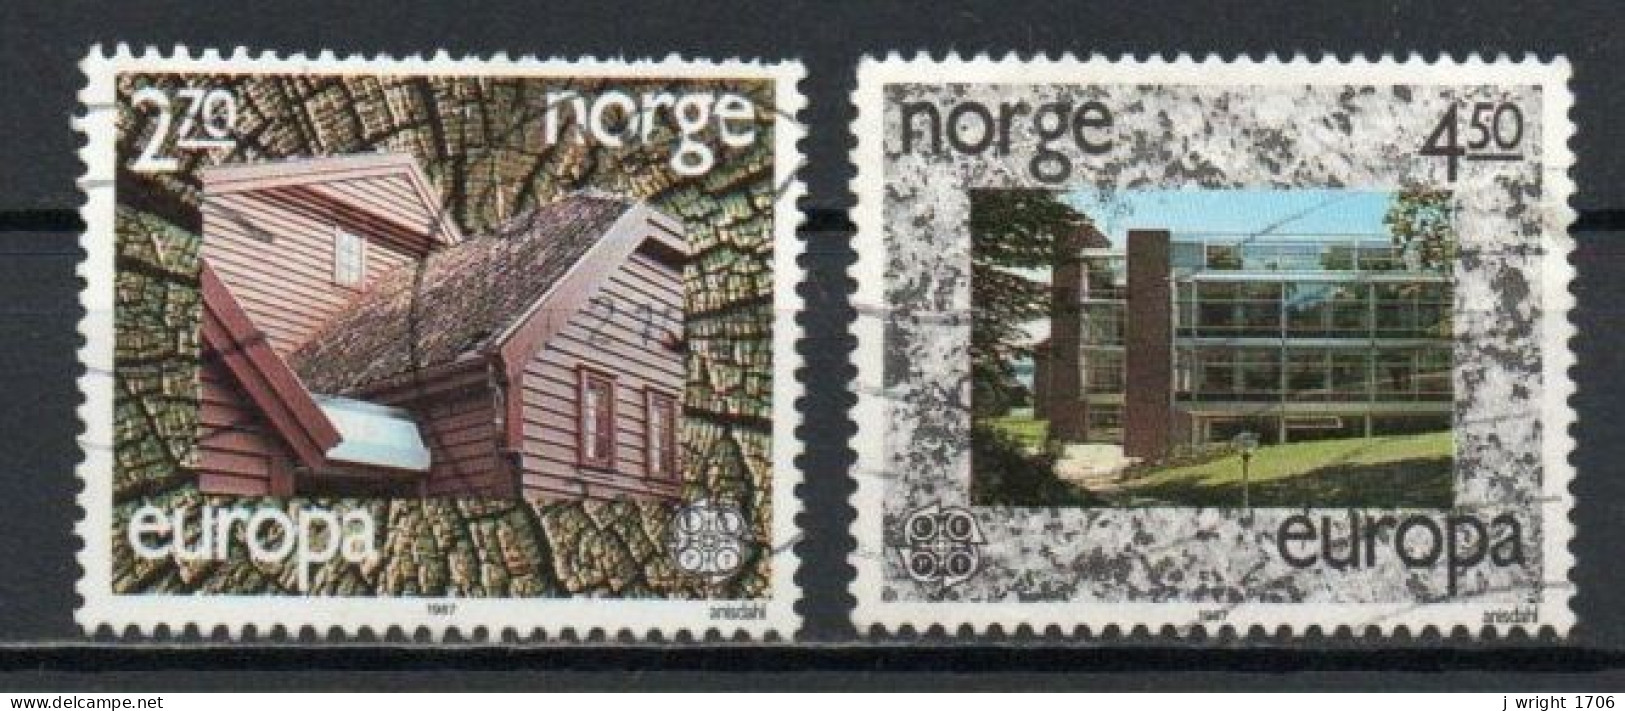 Norway, 1987, Europa CEPT, Set, USED - Used Stamps